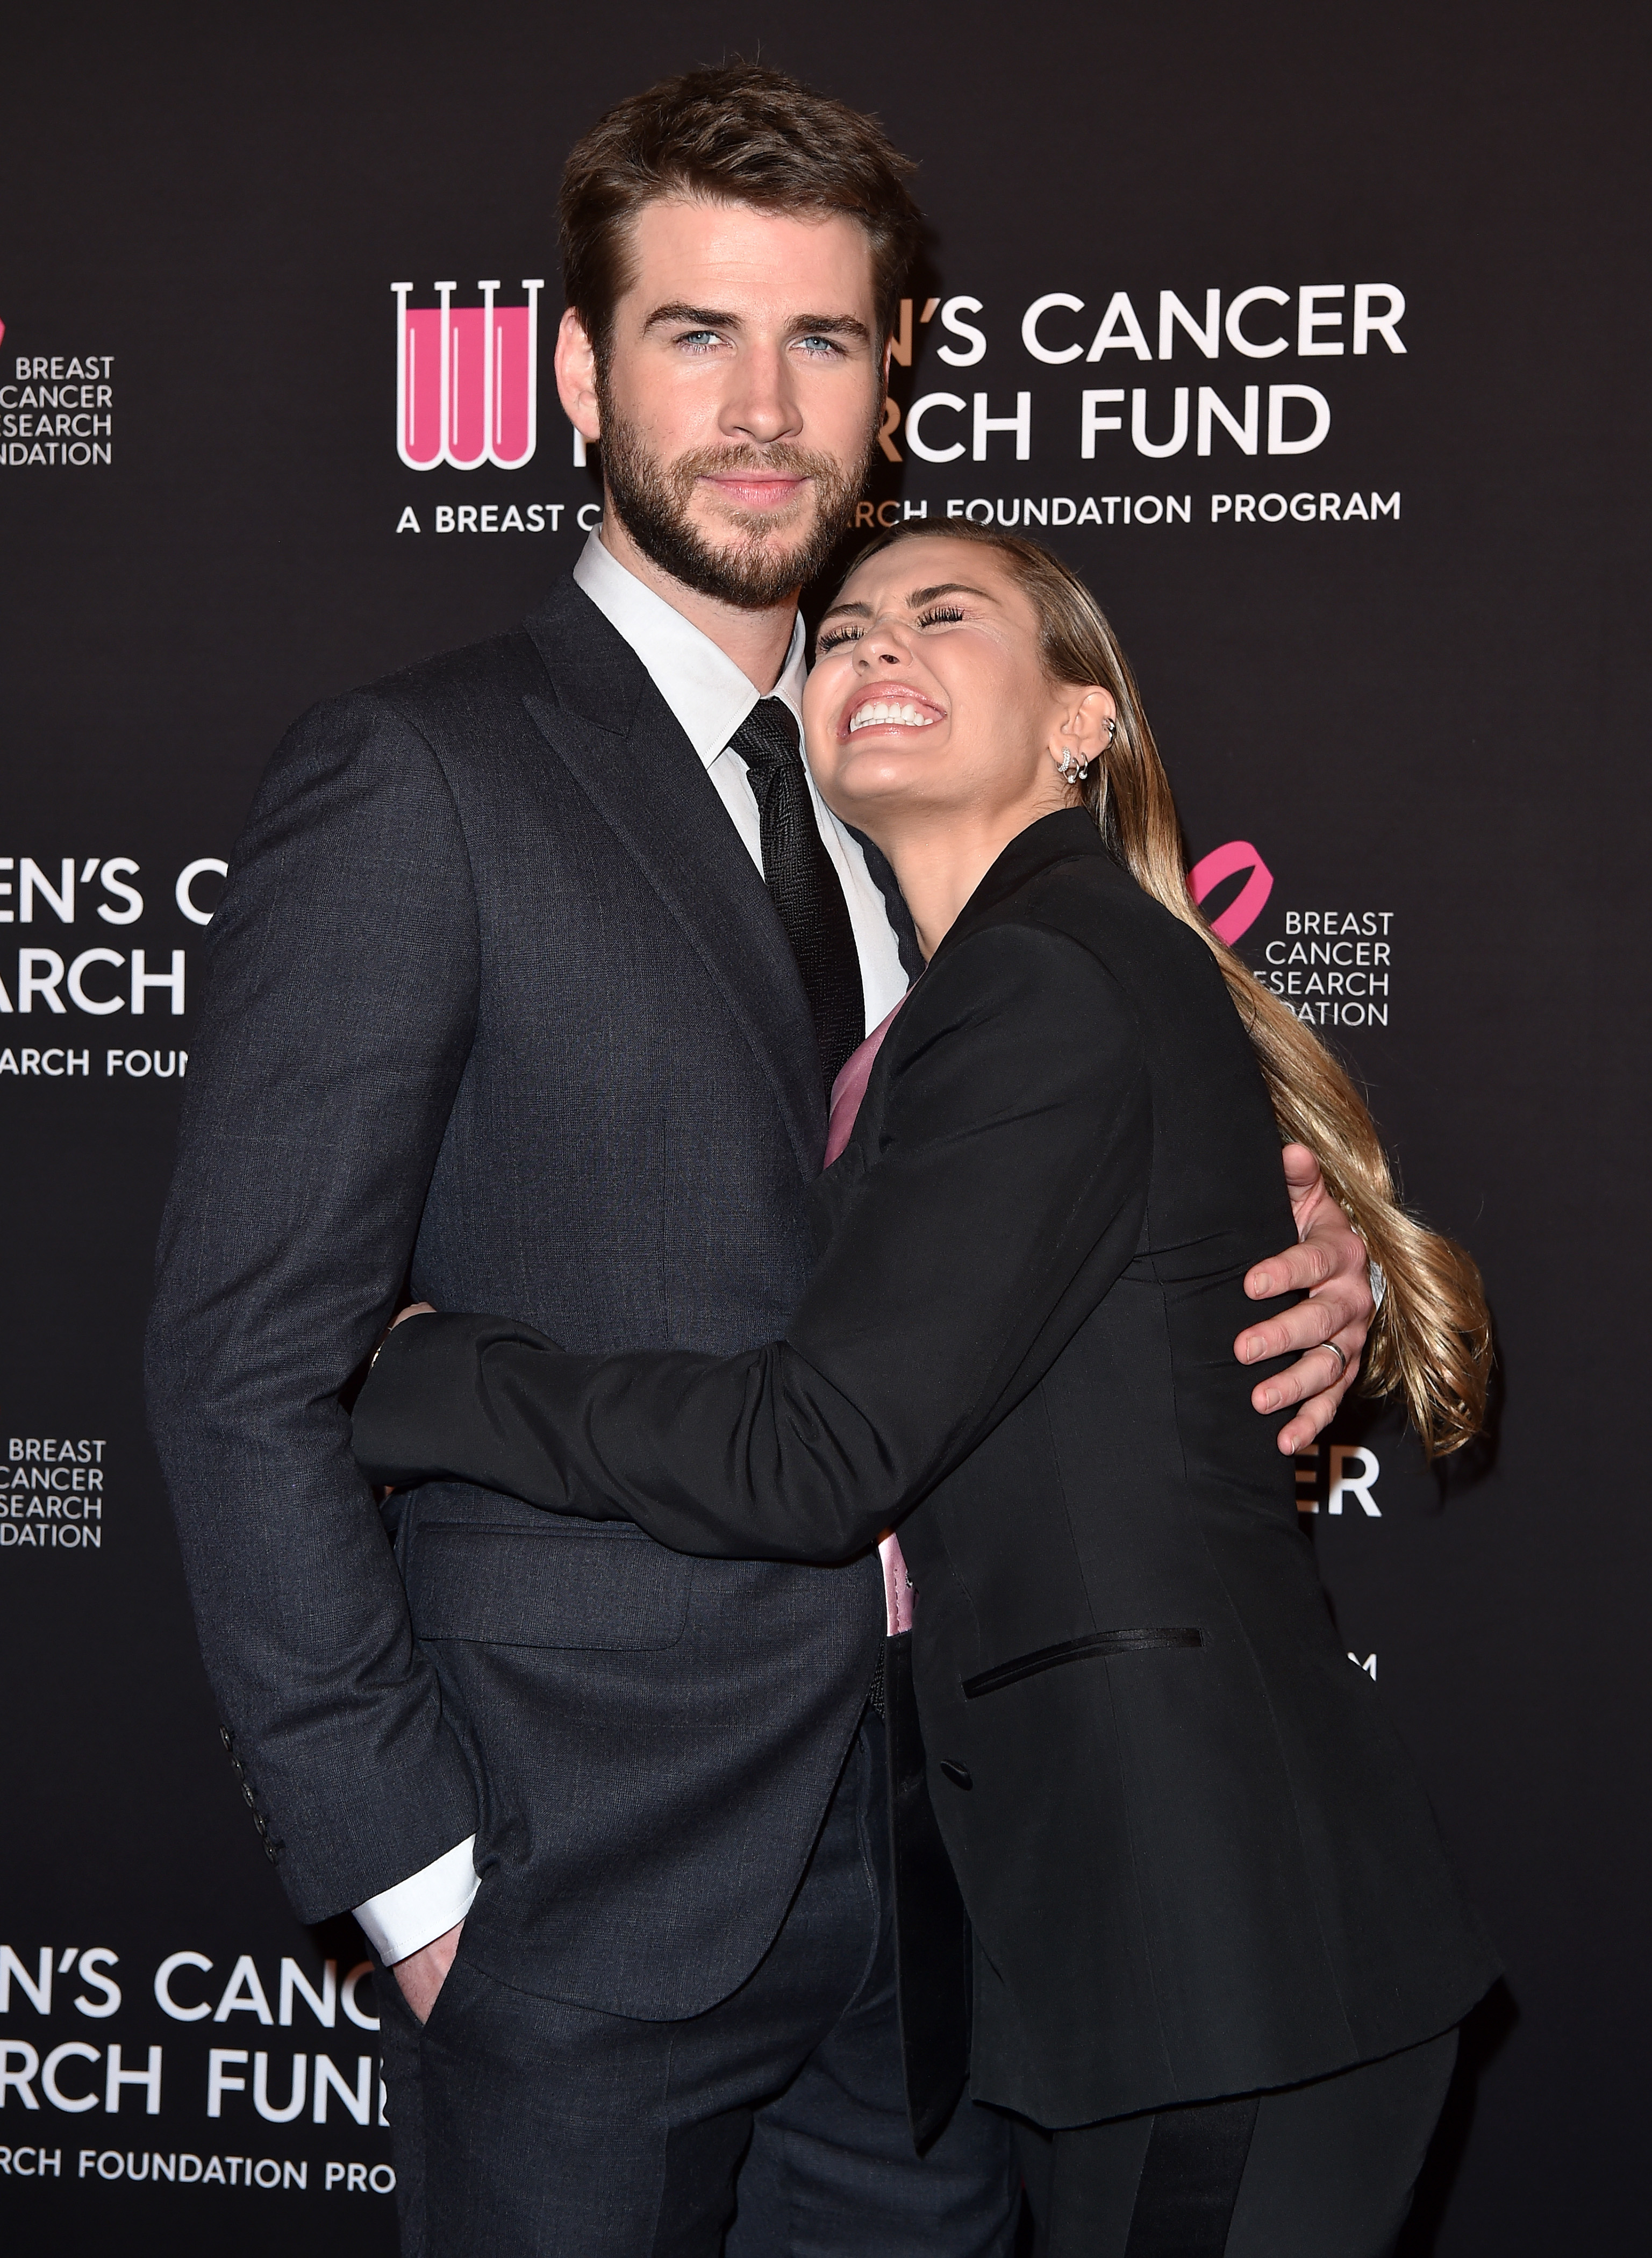 Liam Hemsworth in a suit hugging Miley Cyrus wearing a blazer at an event